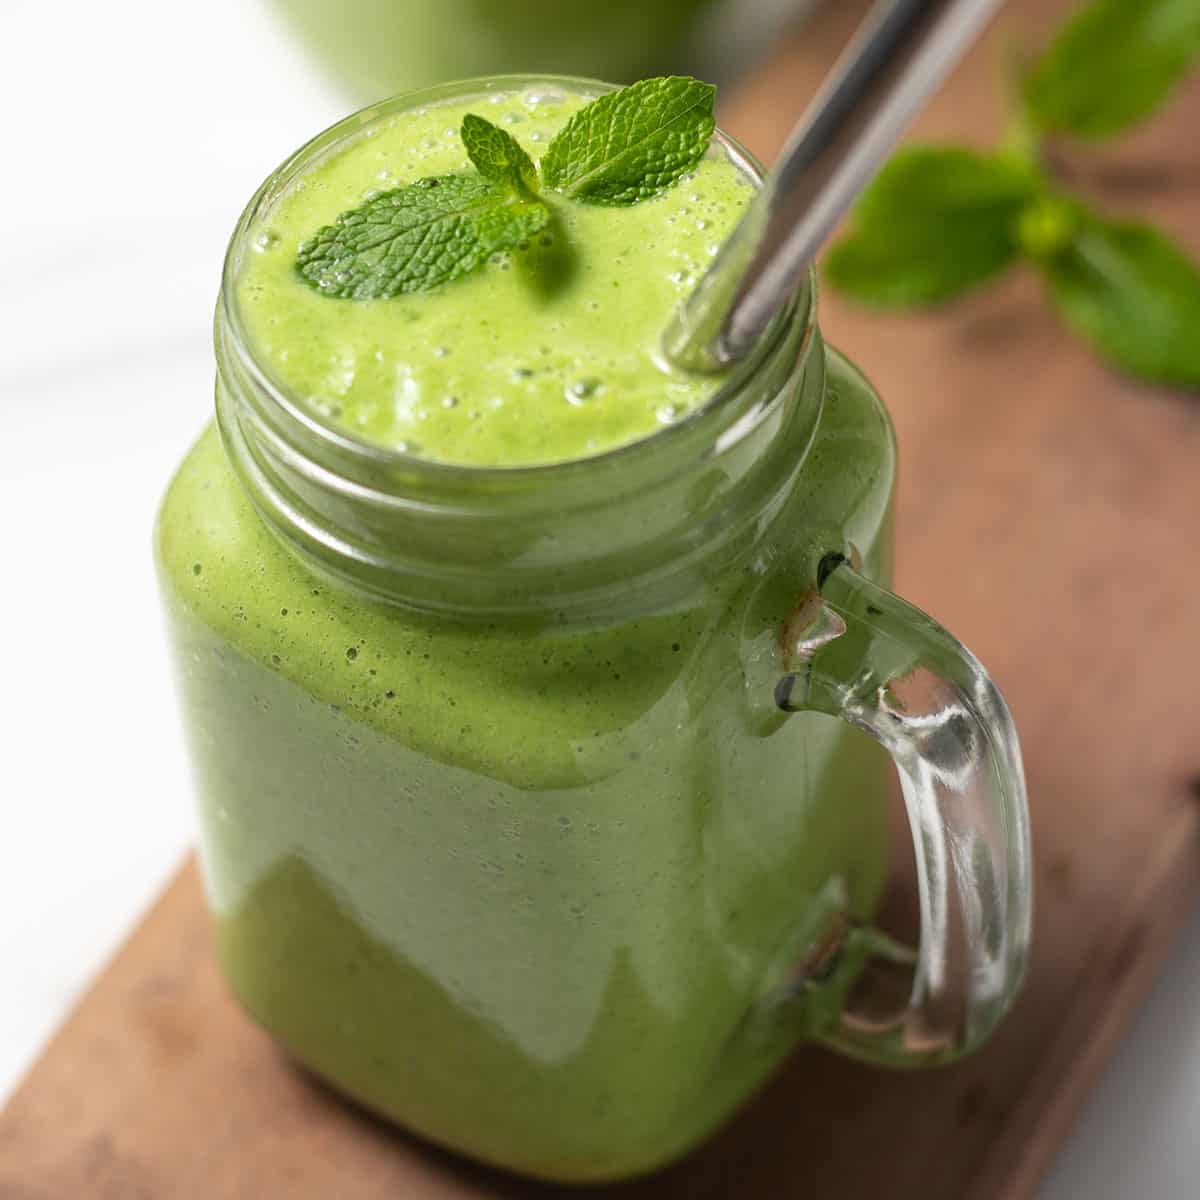 17 Keto Smoothie Recipes (+ Best Low-Carb Shakes) - Insanely Good